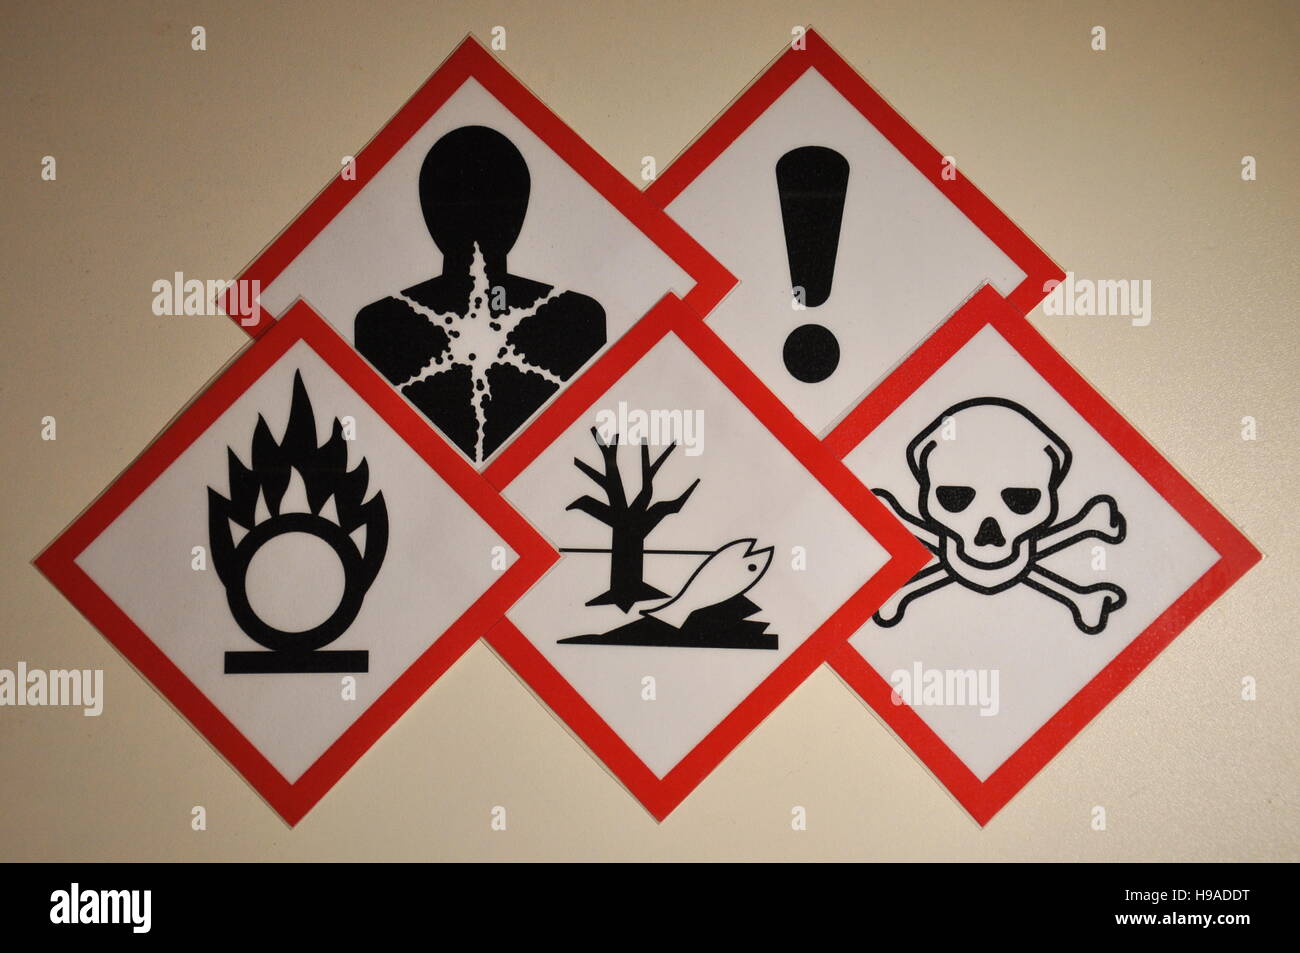 New labeling of hazardous substances, health, safety, protection, chemicals Stock Photo